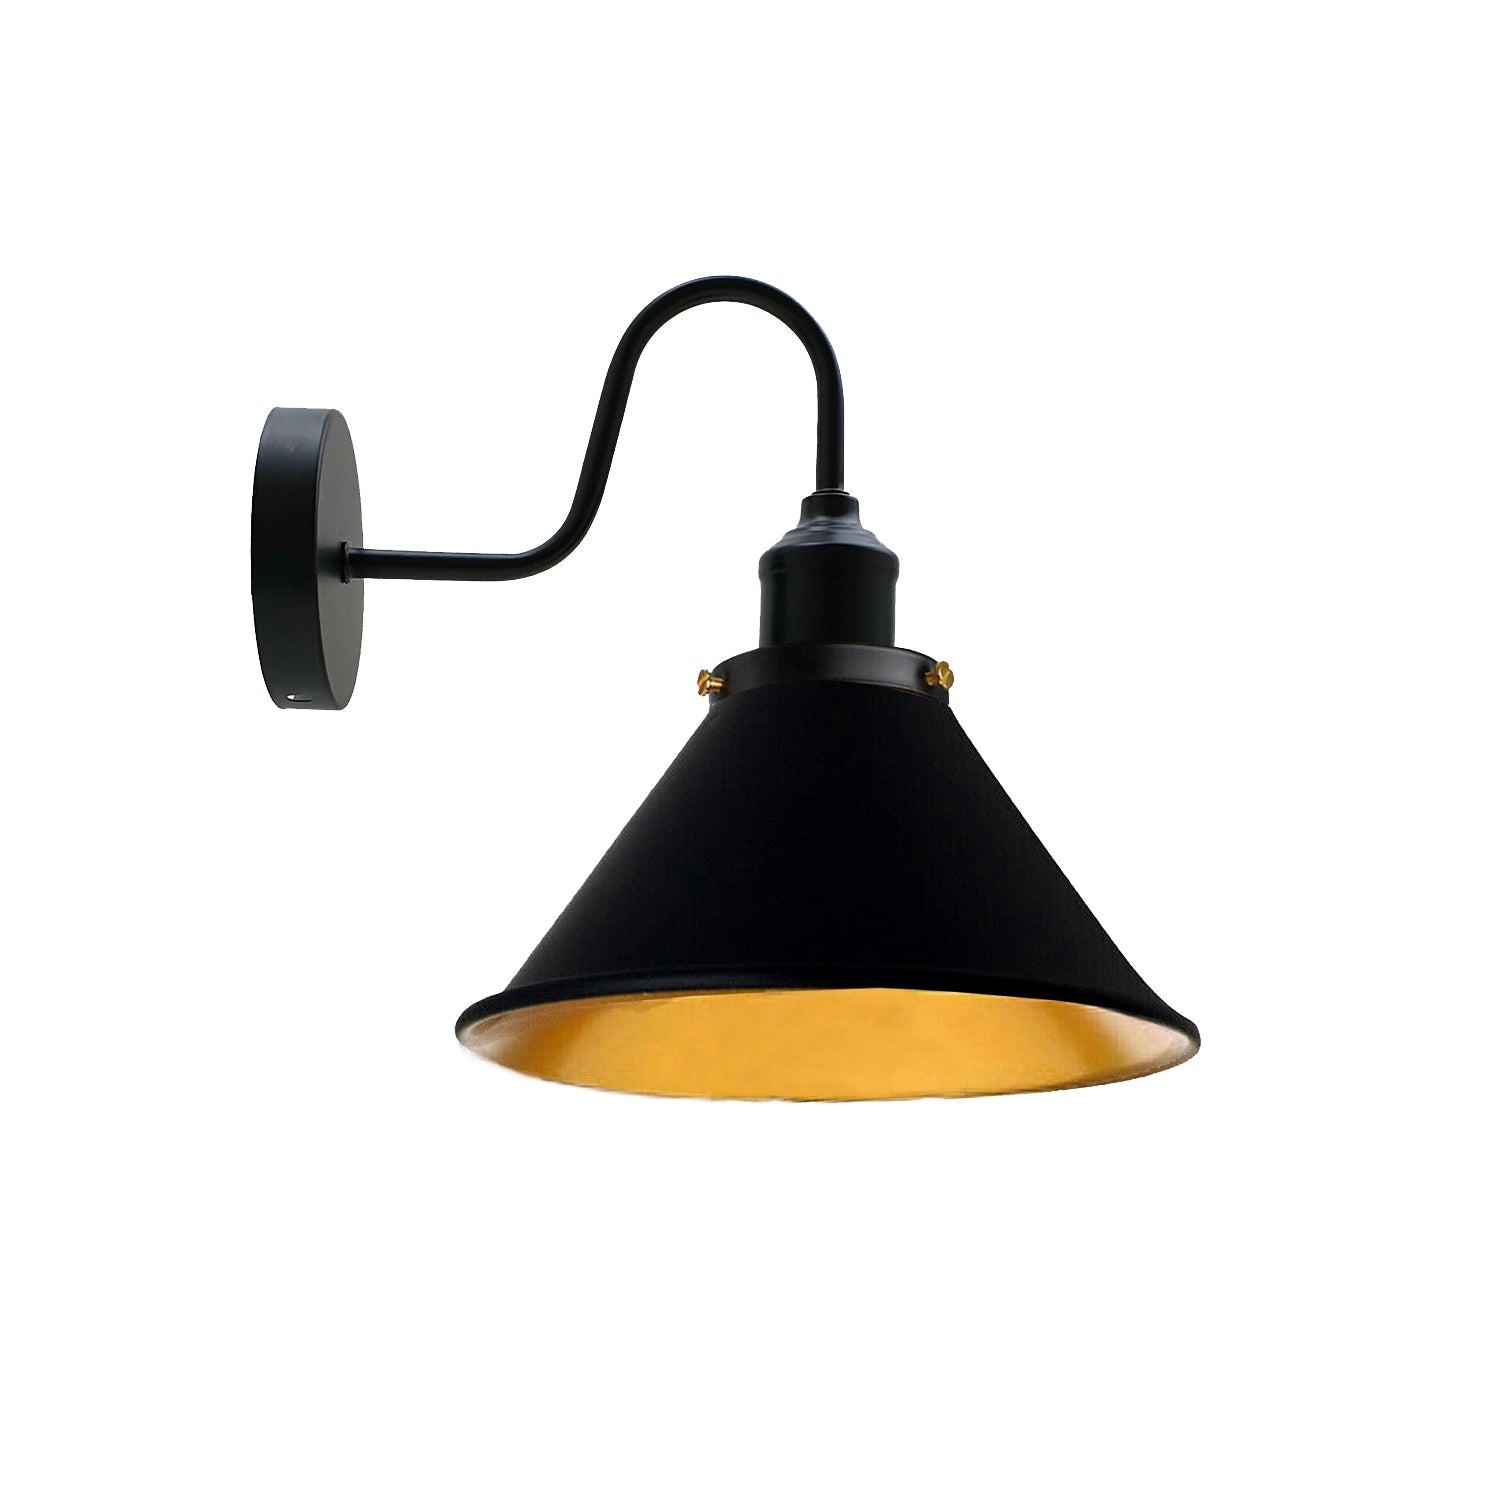 Retro Industrial Swan Neck Cone Shape Wall Sconce Light